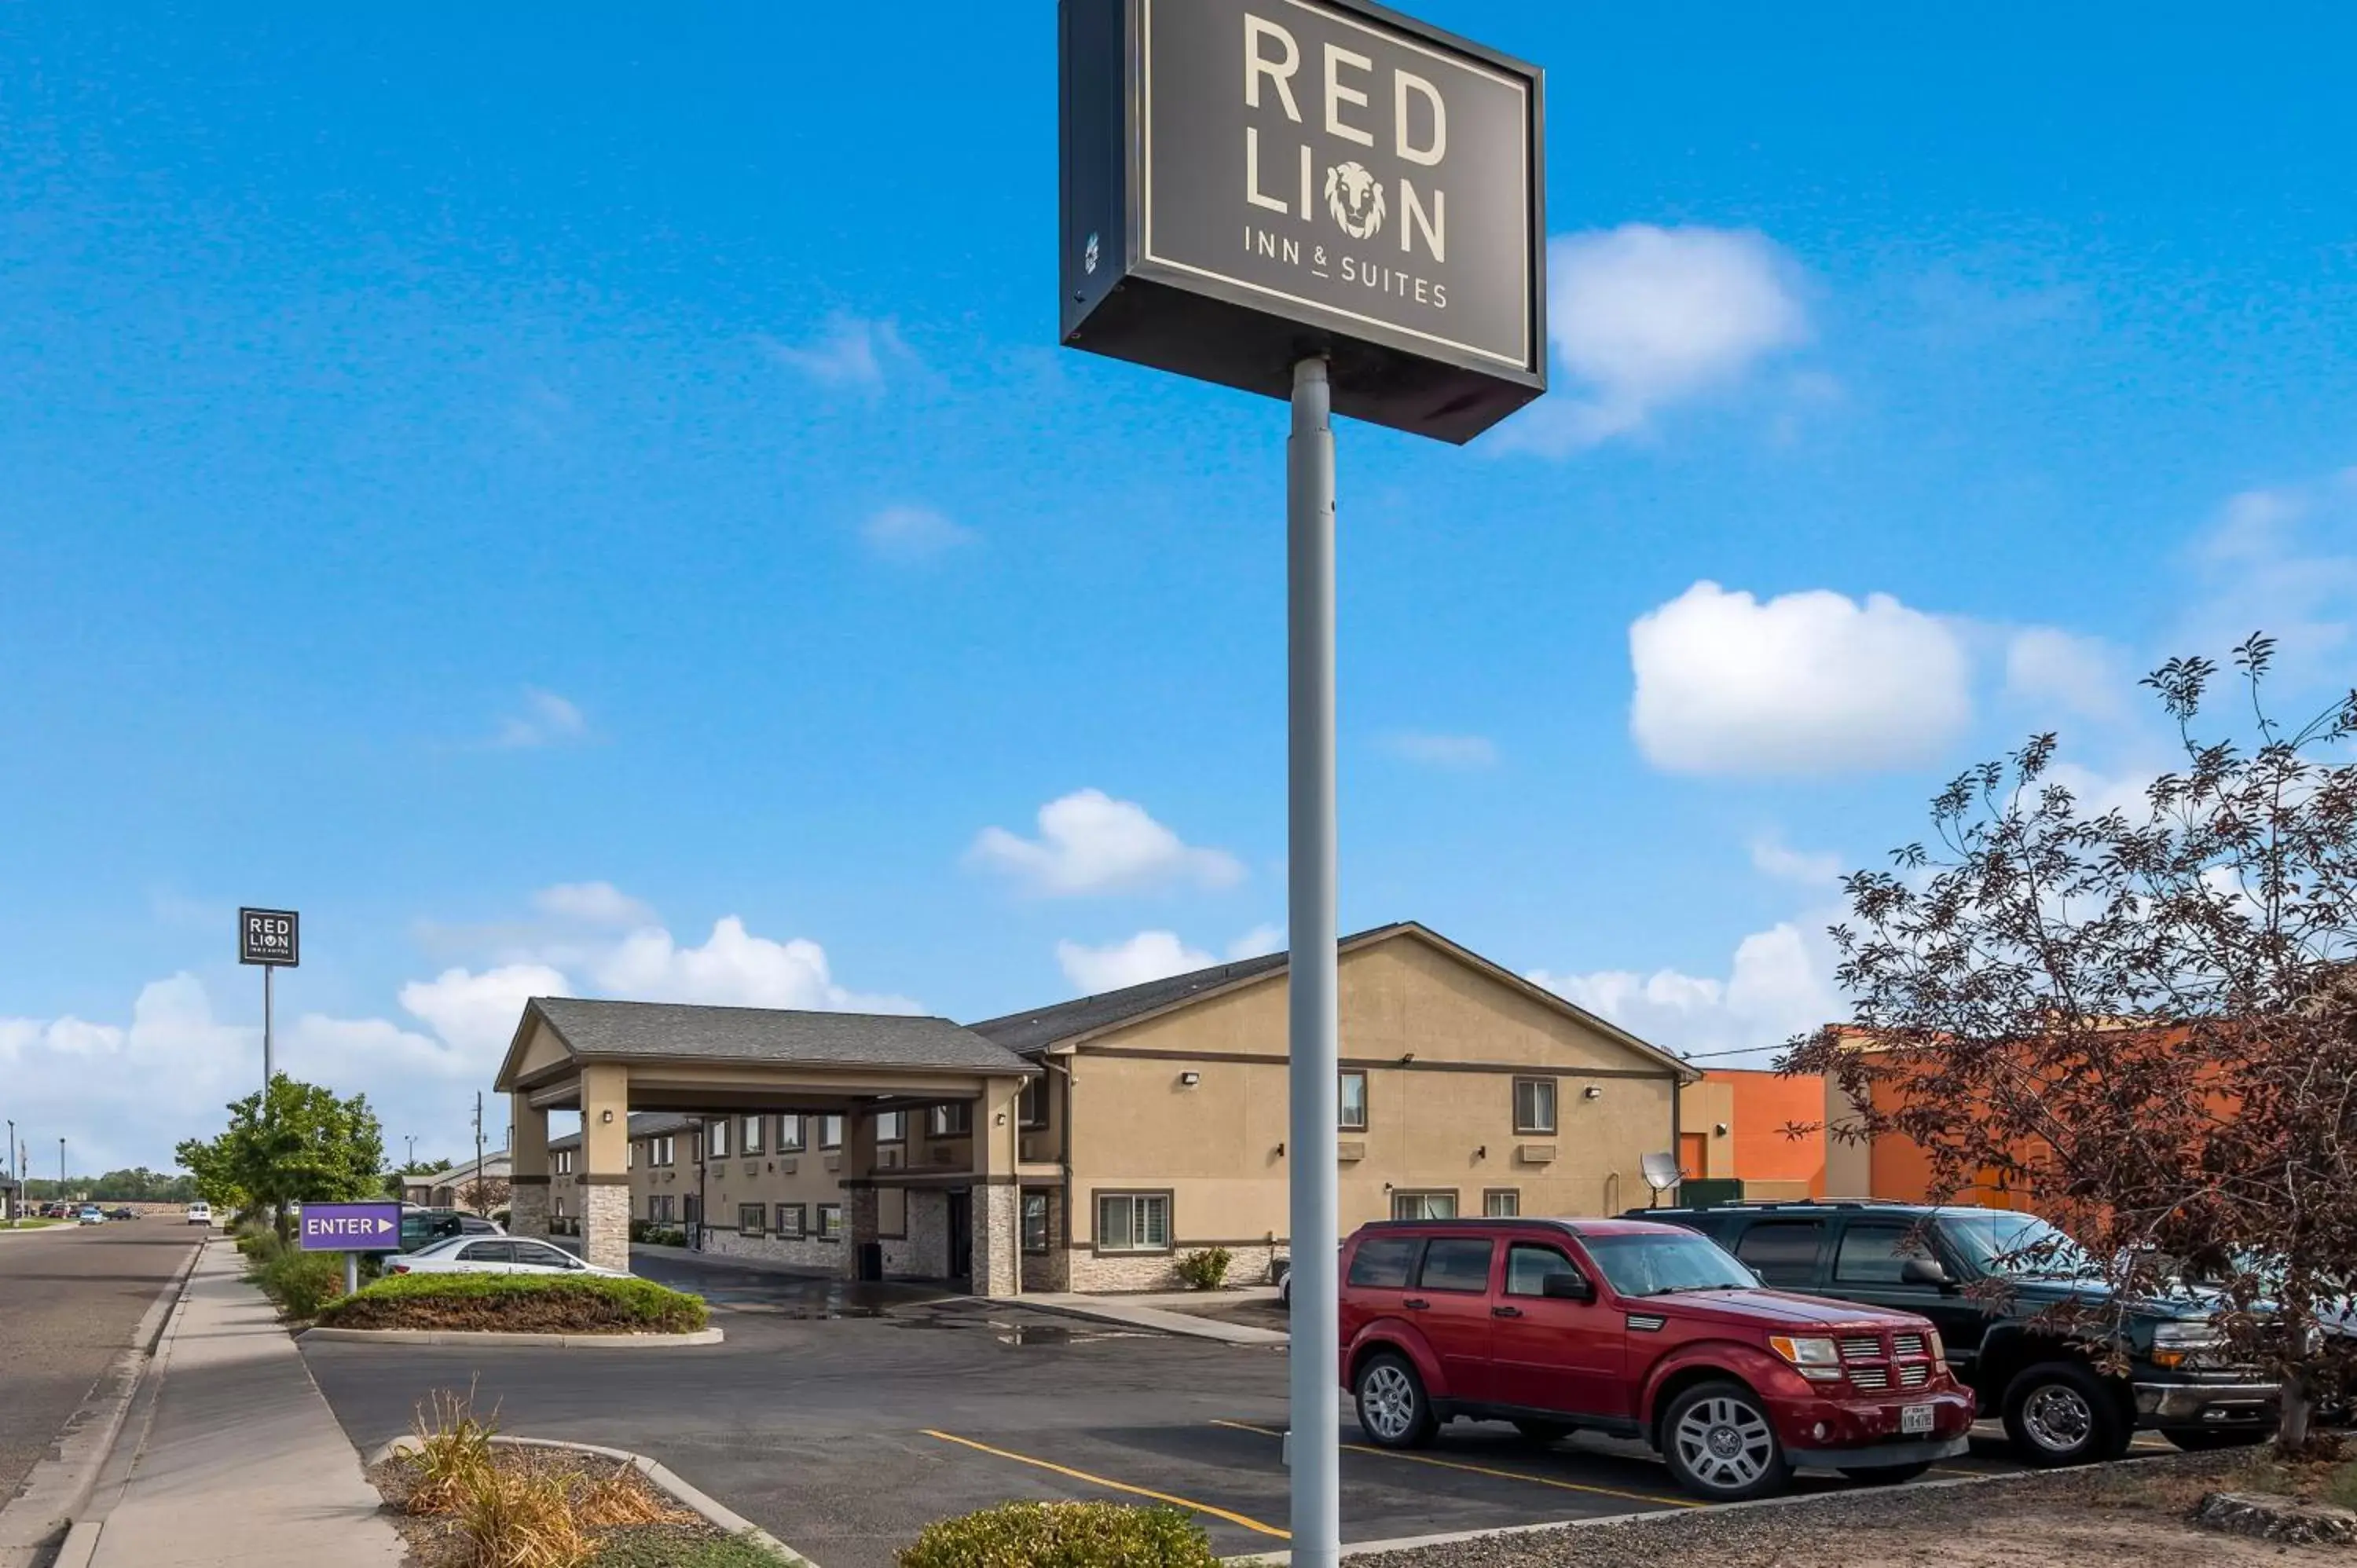 Property Building in Red Lion Inn & Suites Ontario